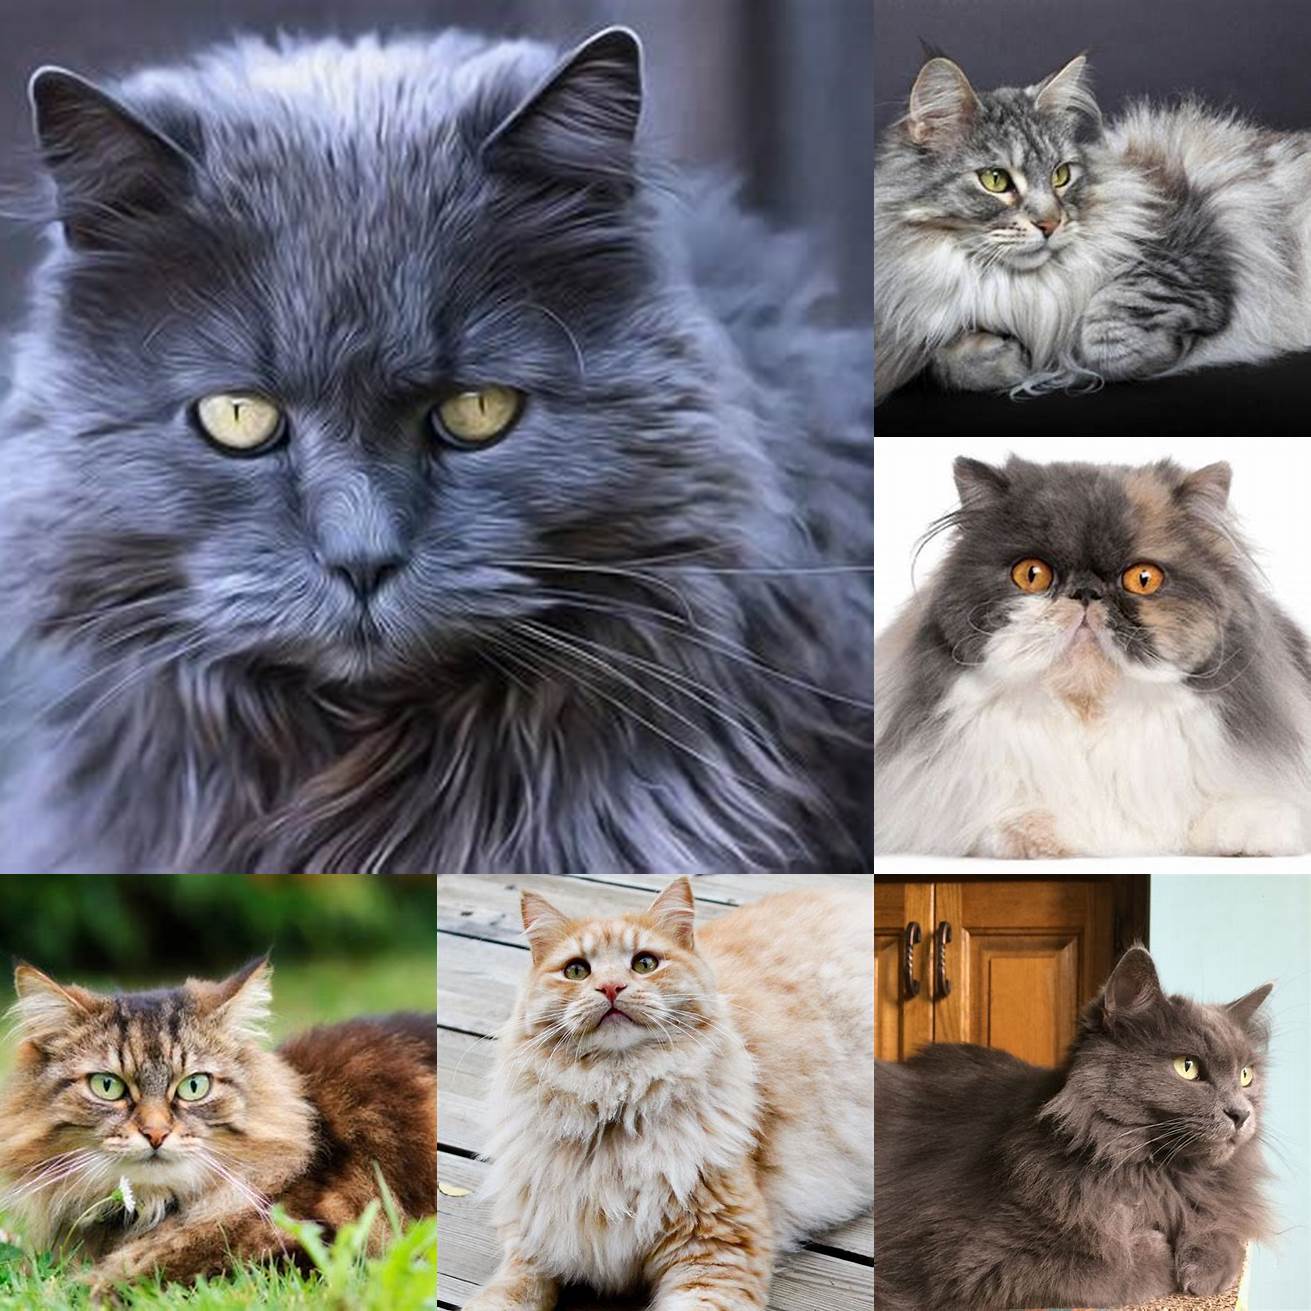 6 Long-haired cats